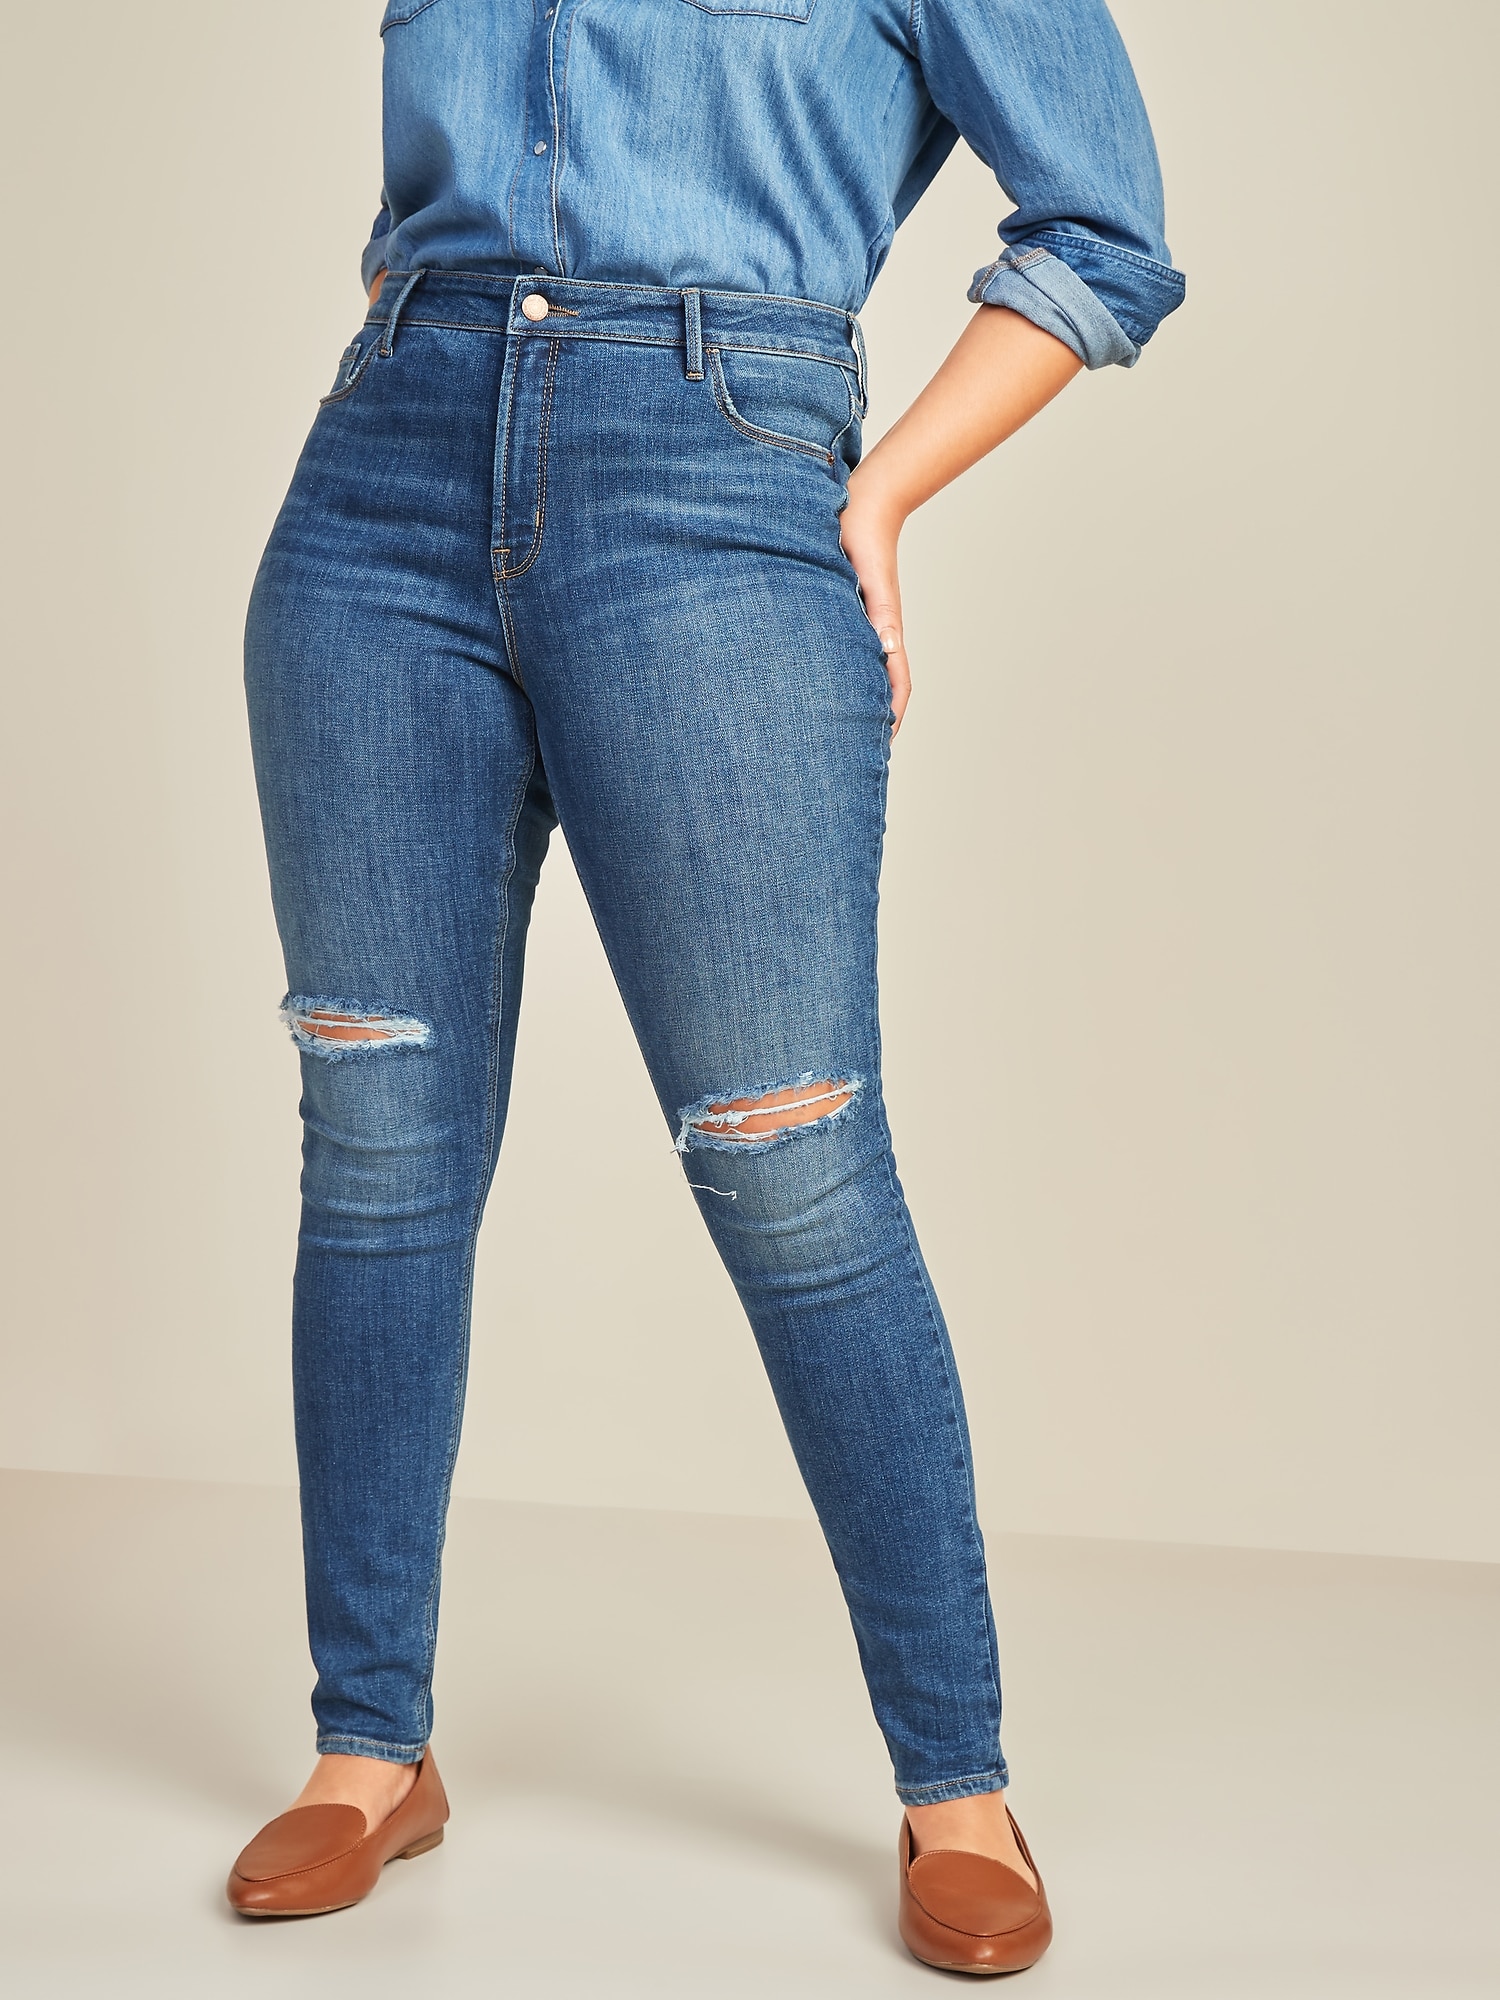 very ripped jeans women's